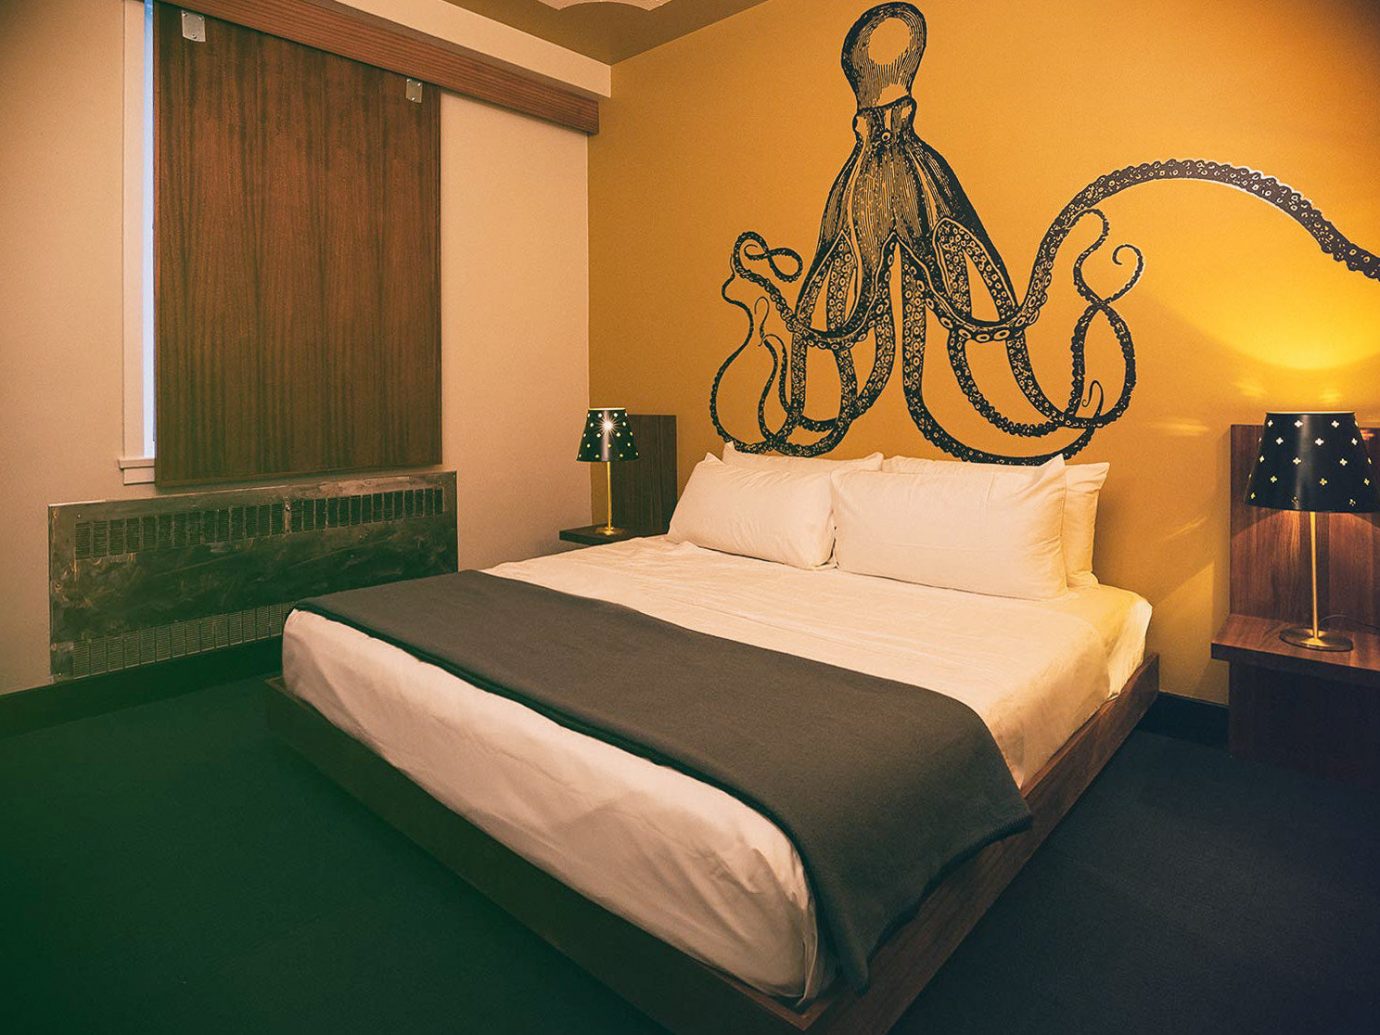 Alberta Boutique Hotels Canada Hotels room Suite wall interior design Bedroom bed ceiling furniture hotel bed frame